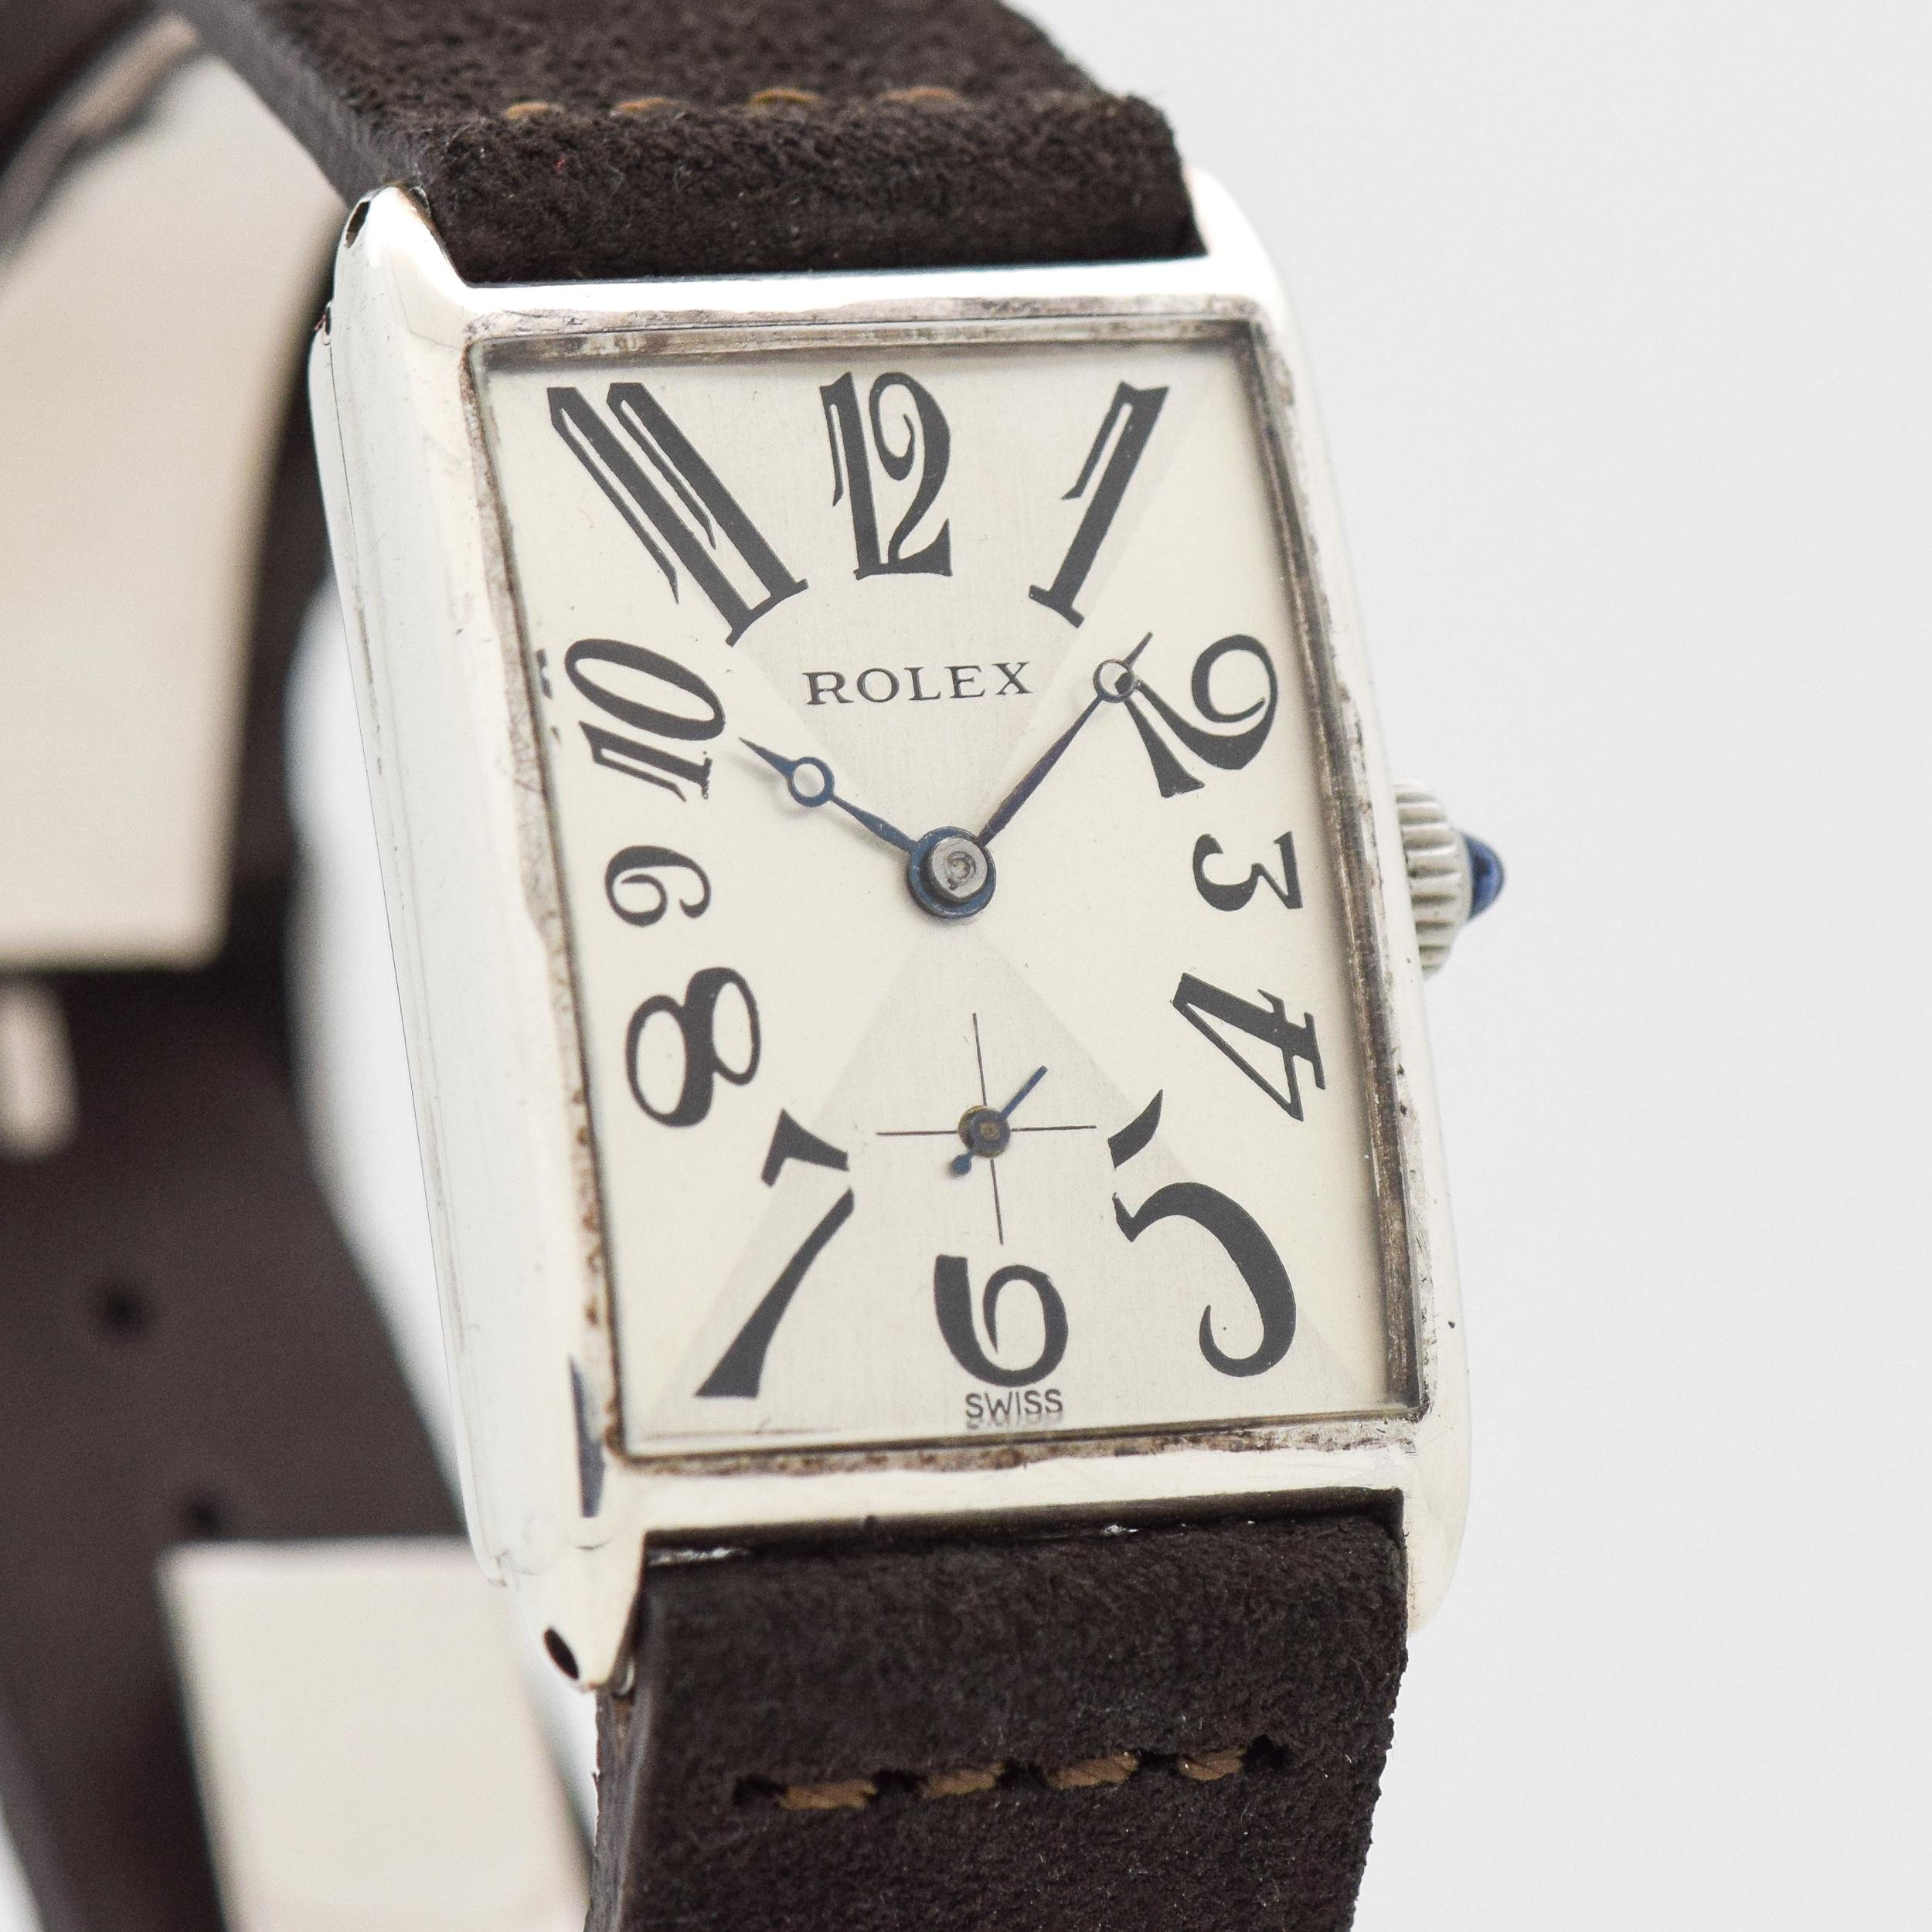 1930's Vintage Rolex Rectangle Sterling Silver Case watch with Two Tone Silver and Gray Dial with Black Exploded Breguet Arabic Numbers. 25mm x 38mm lug to lug (0.98 in. x 1.5 in.) - 6 jewel, manual caliber movement. Featured on a Sueded Genuine